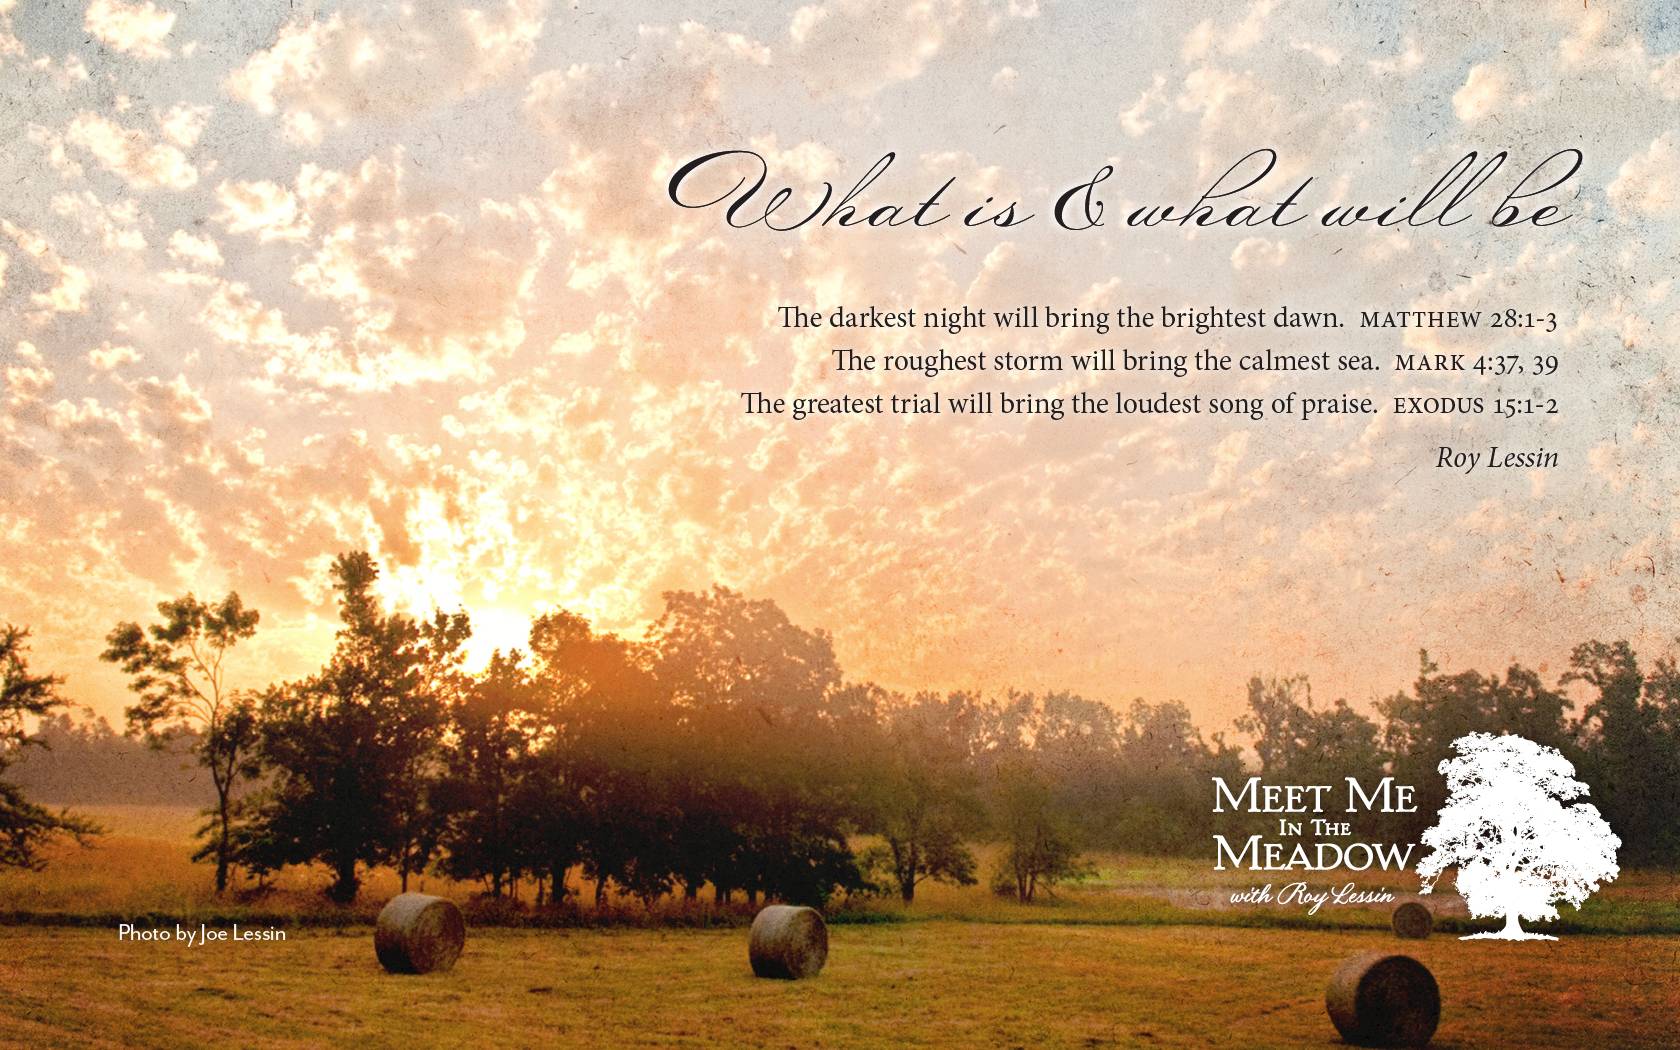 Meet Me In The Meadow Devotional Online with Roy Lessin